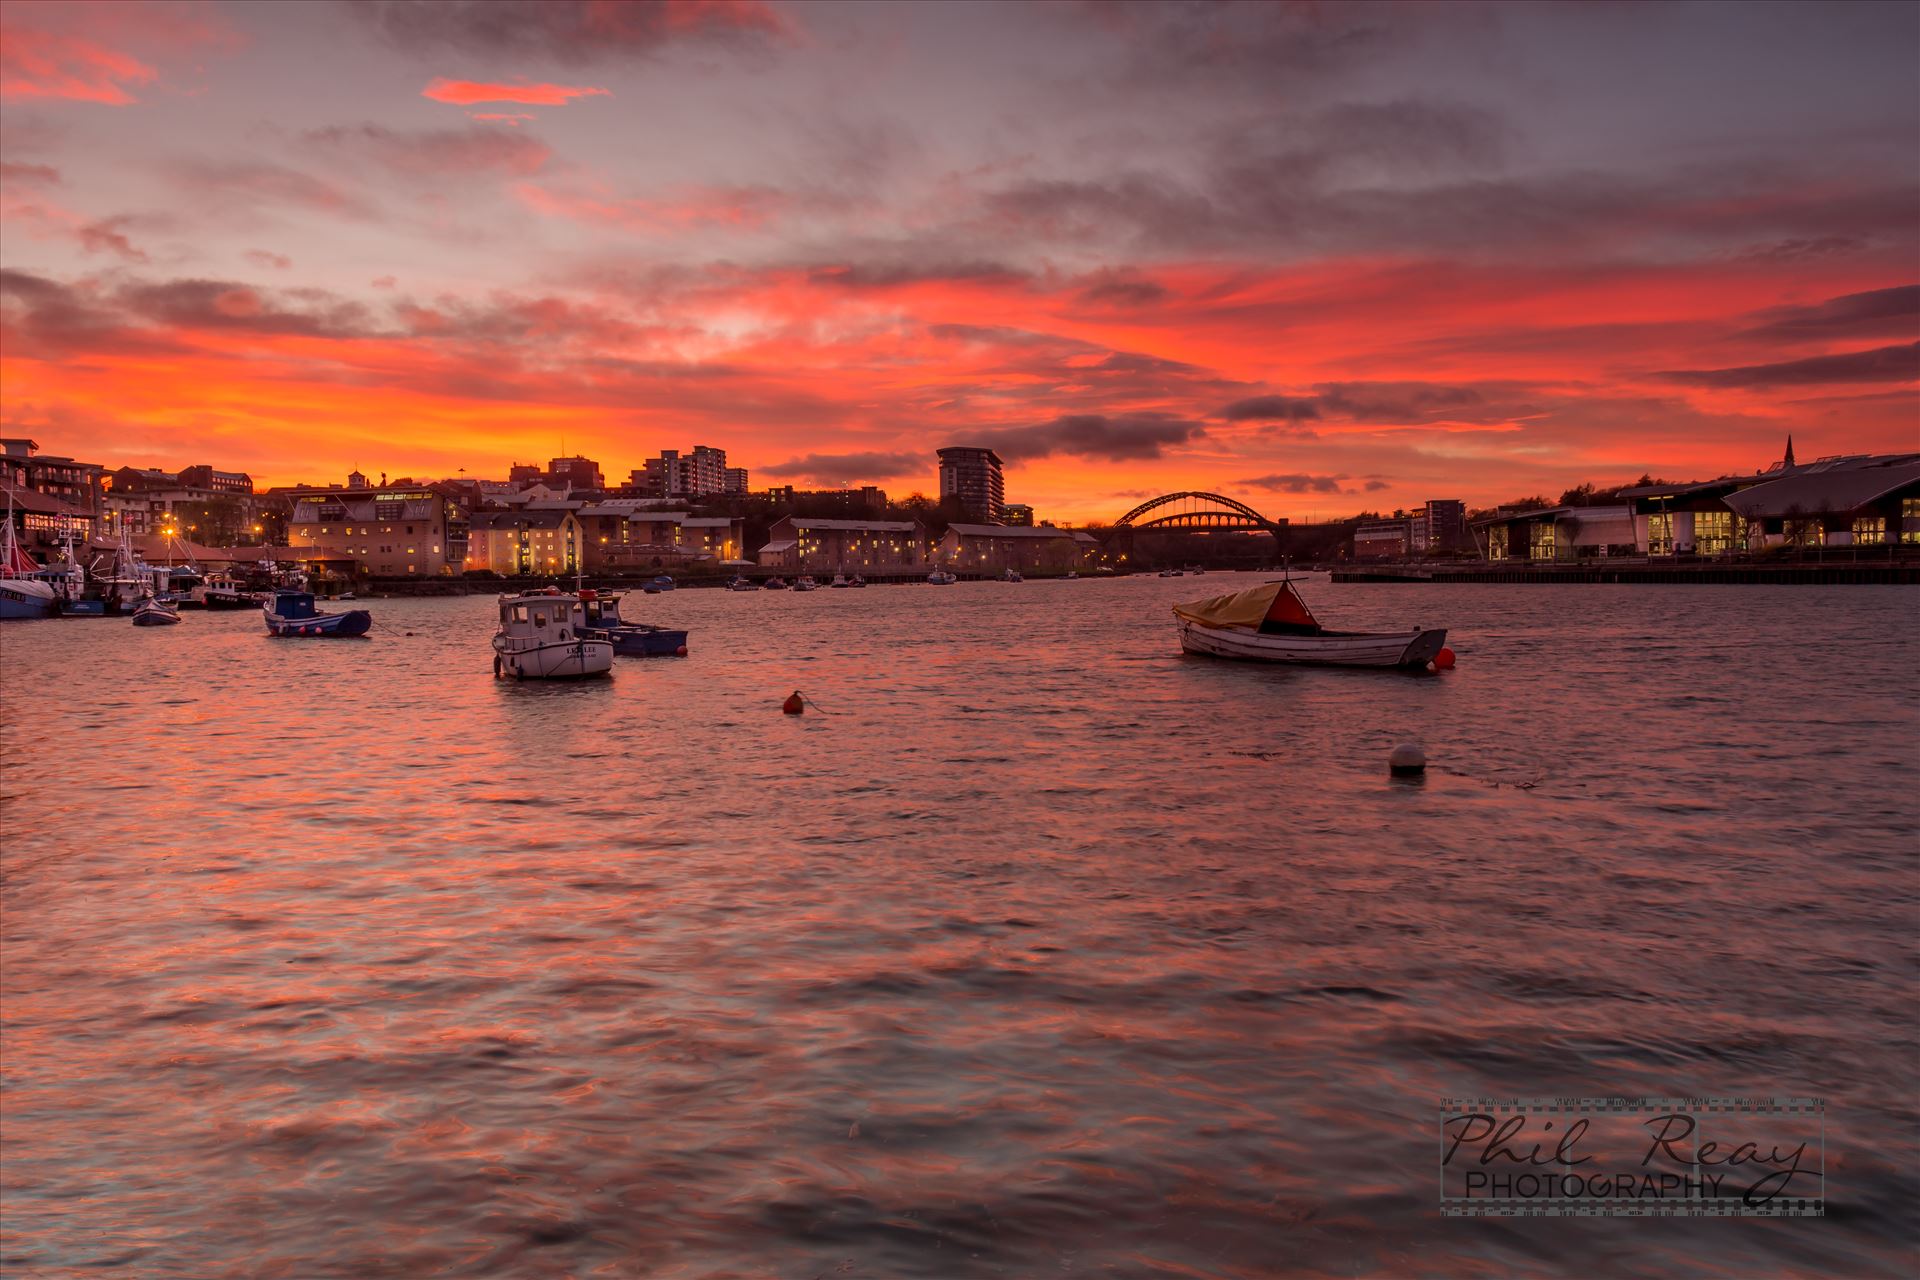 Fishing boats at sunset - A fabulous sunset at Sunderland Fish Quay by philreay